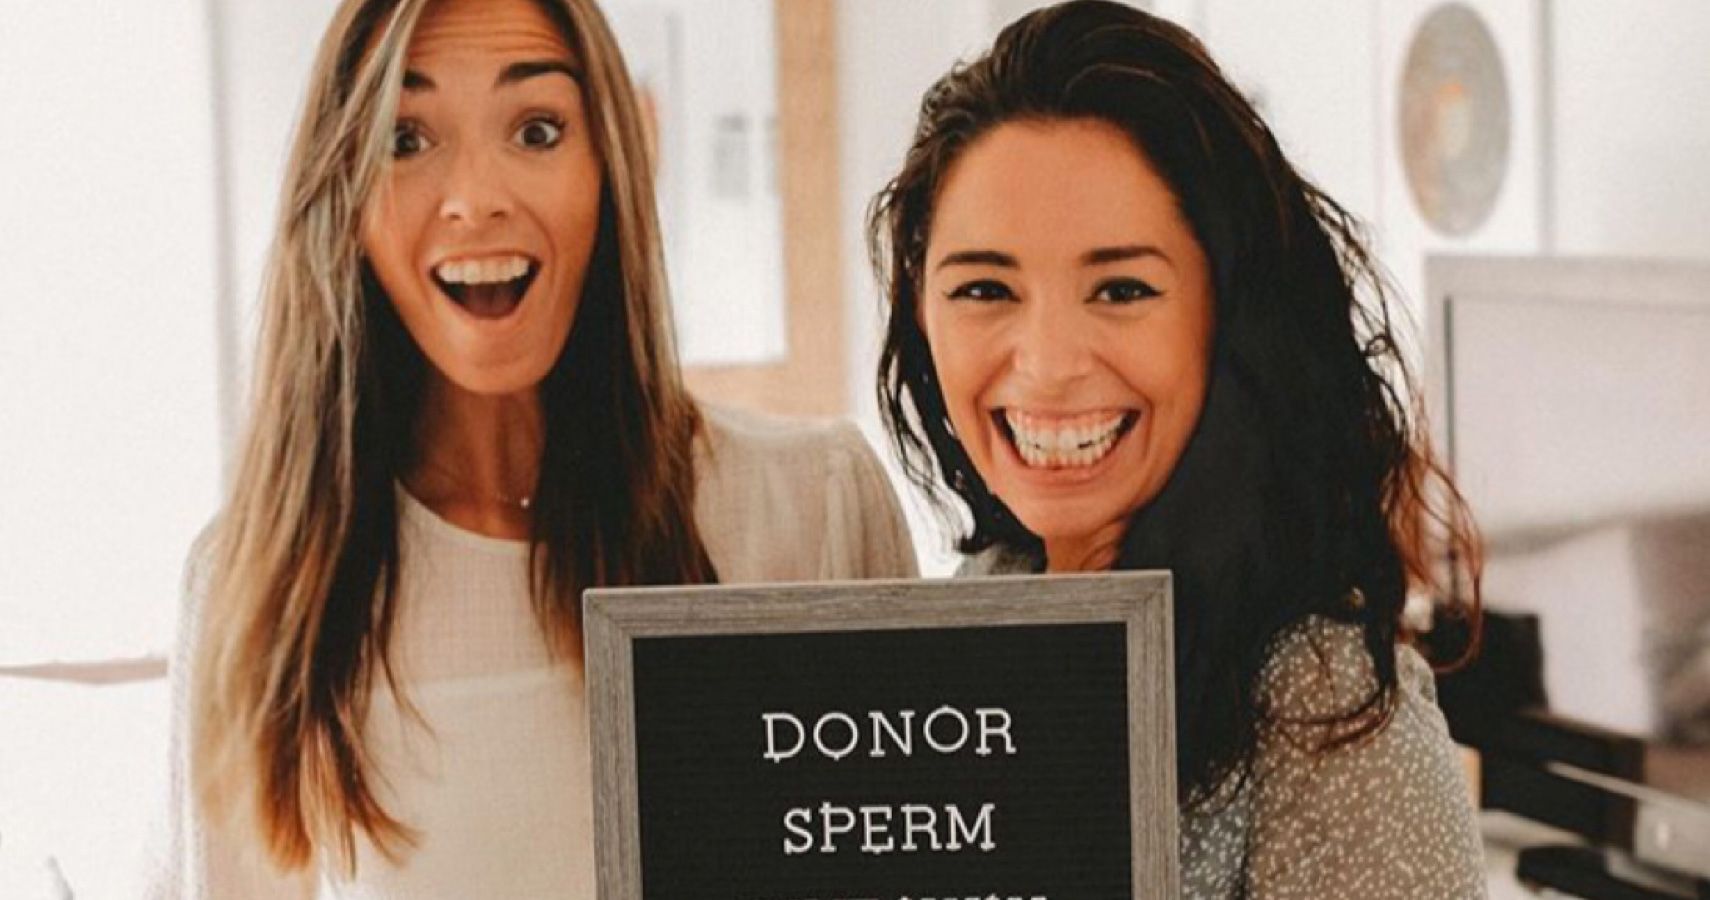 Same Sex Couple Instagrammers Announce Donor Sperm Giveaway 2368